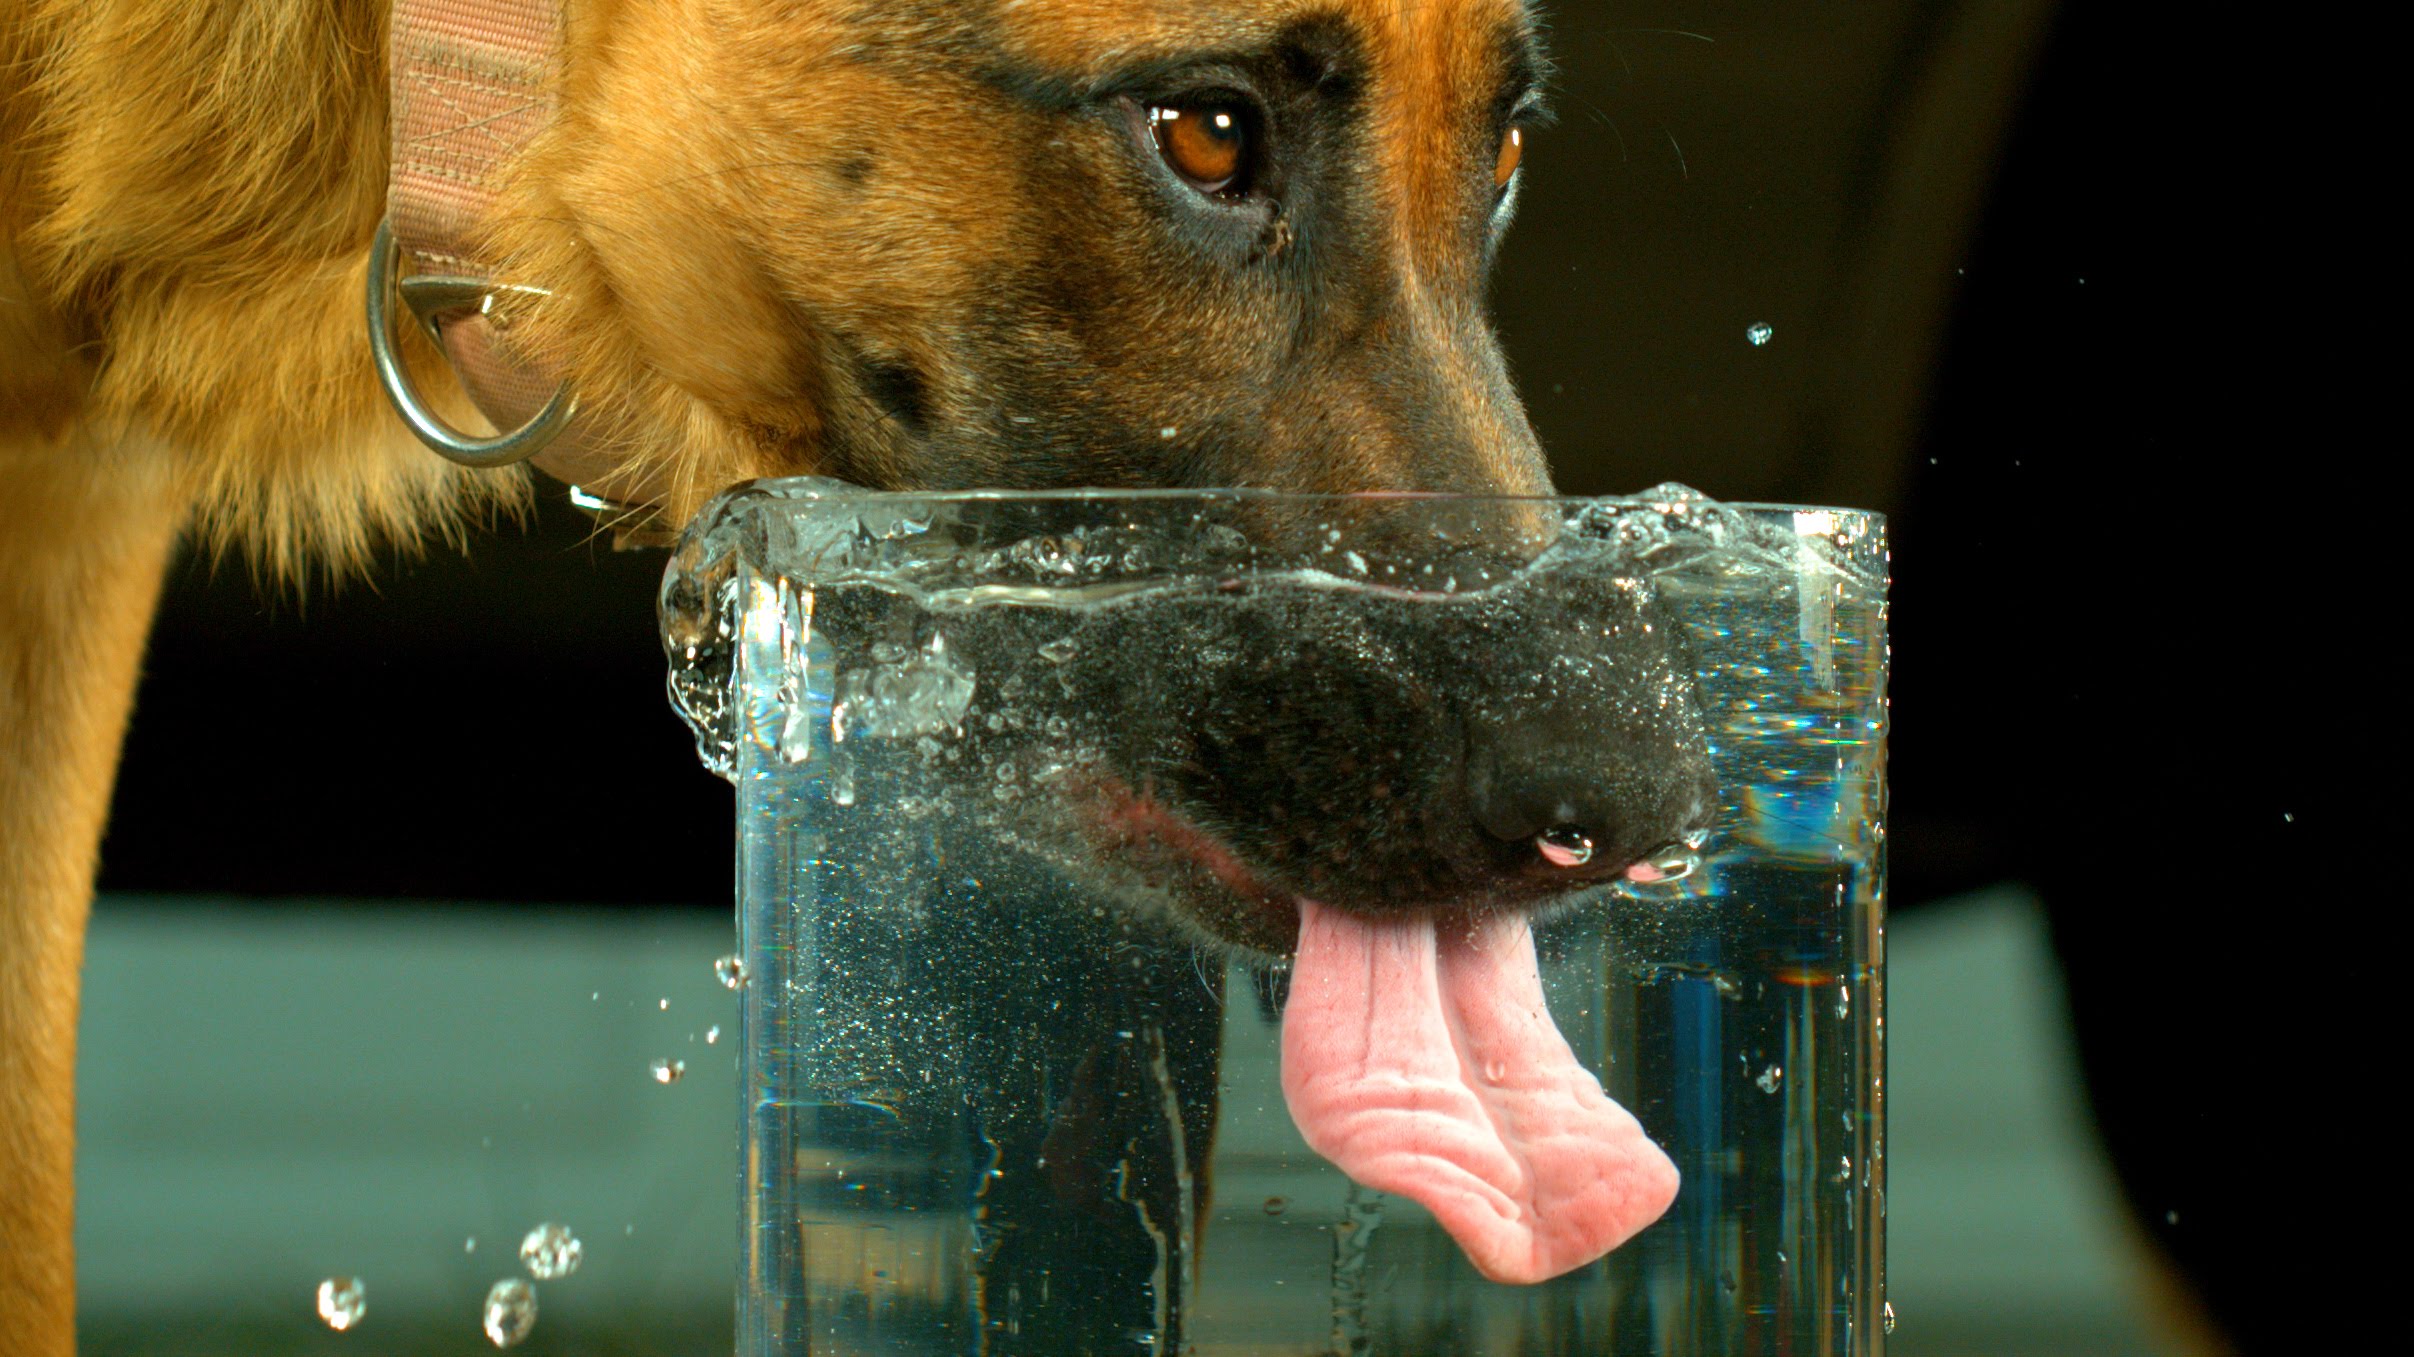 Dog Drinking Water in 4K Slow Motion - Very Differently [ 4K Ultra ...